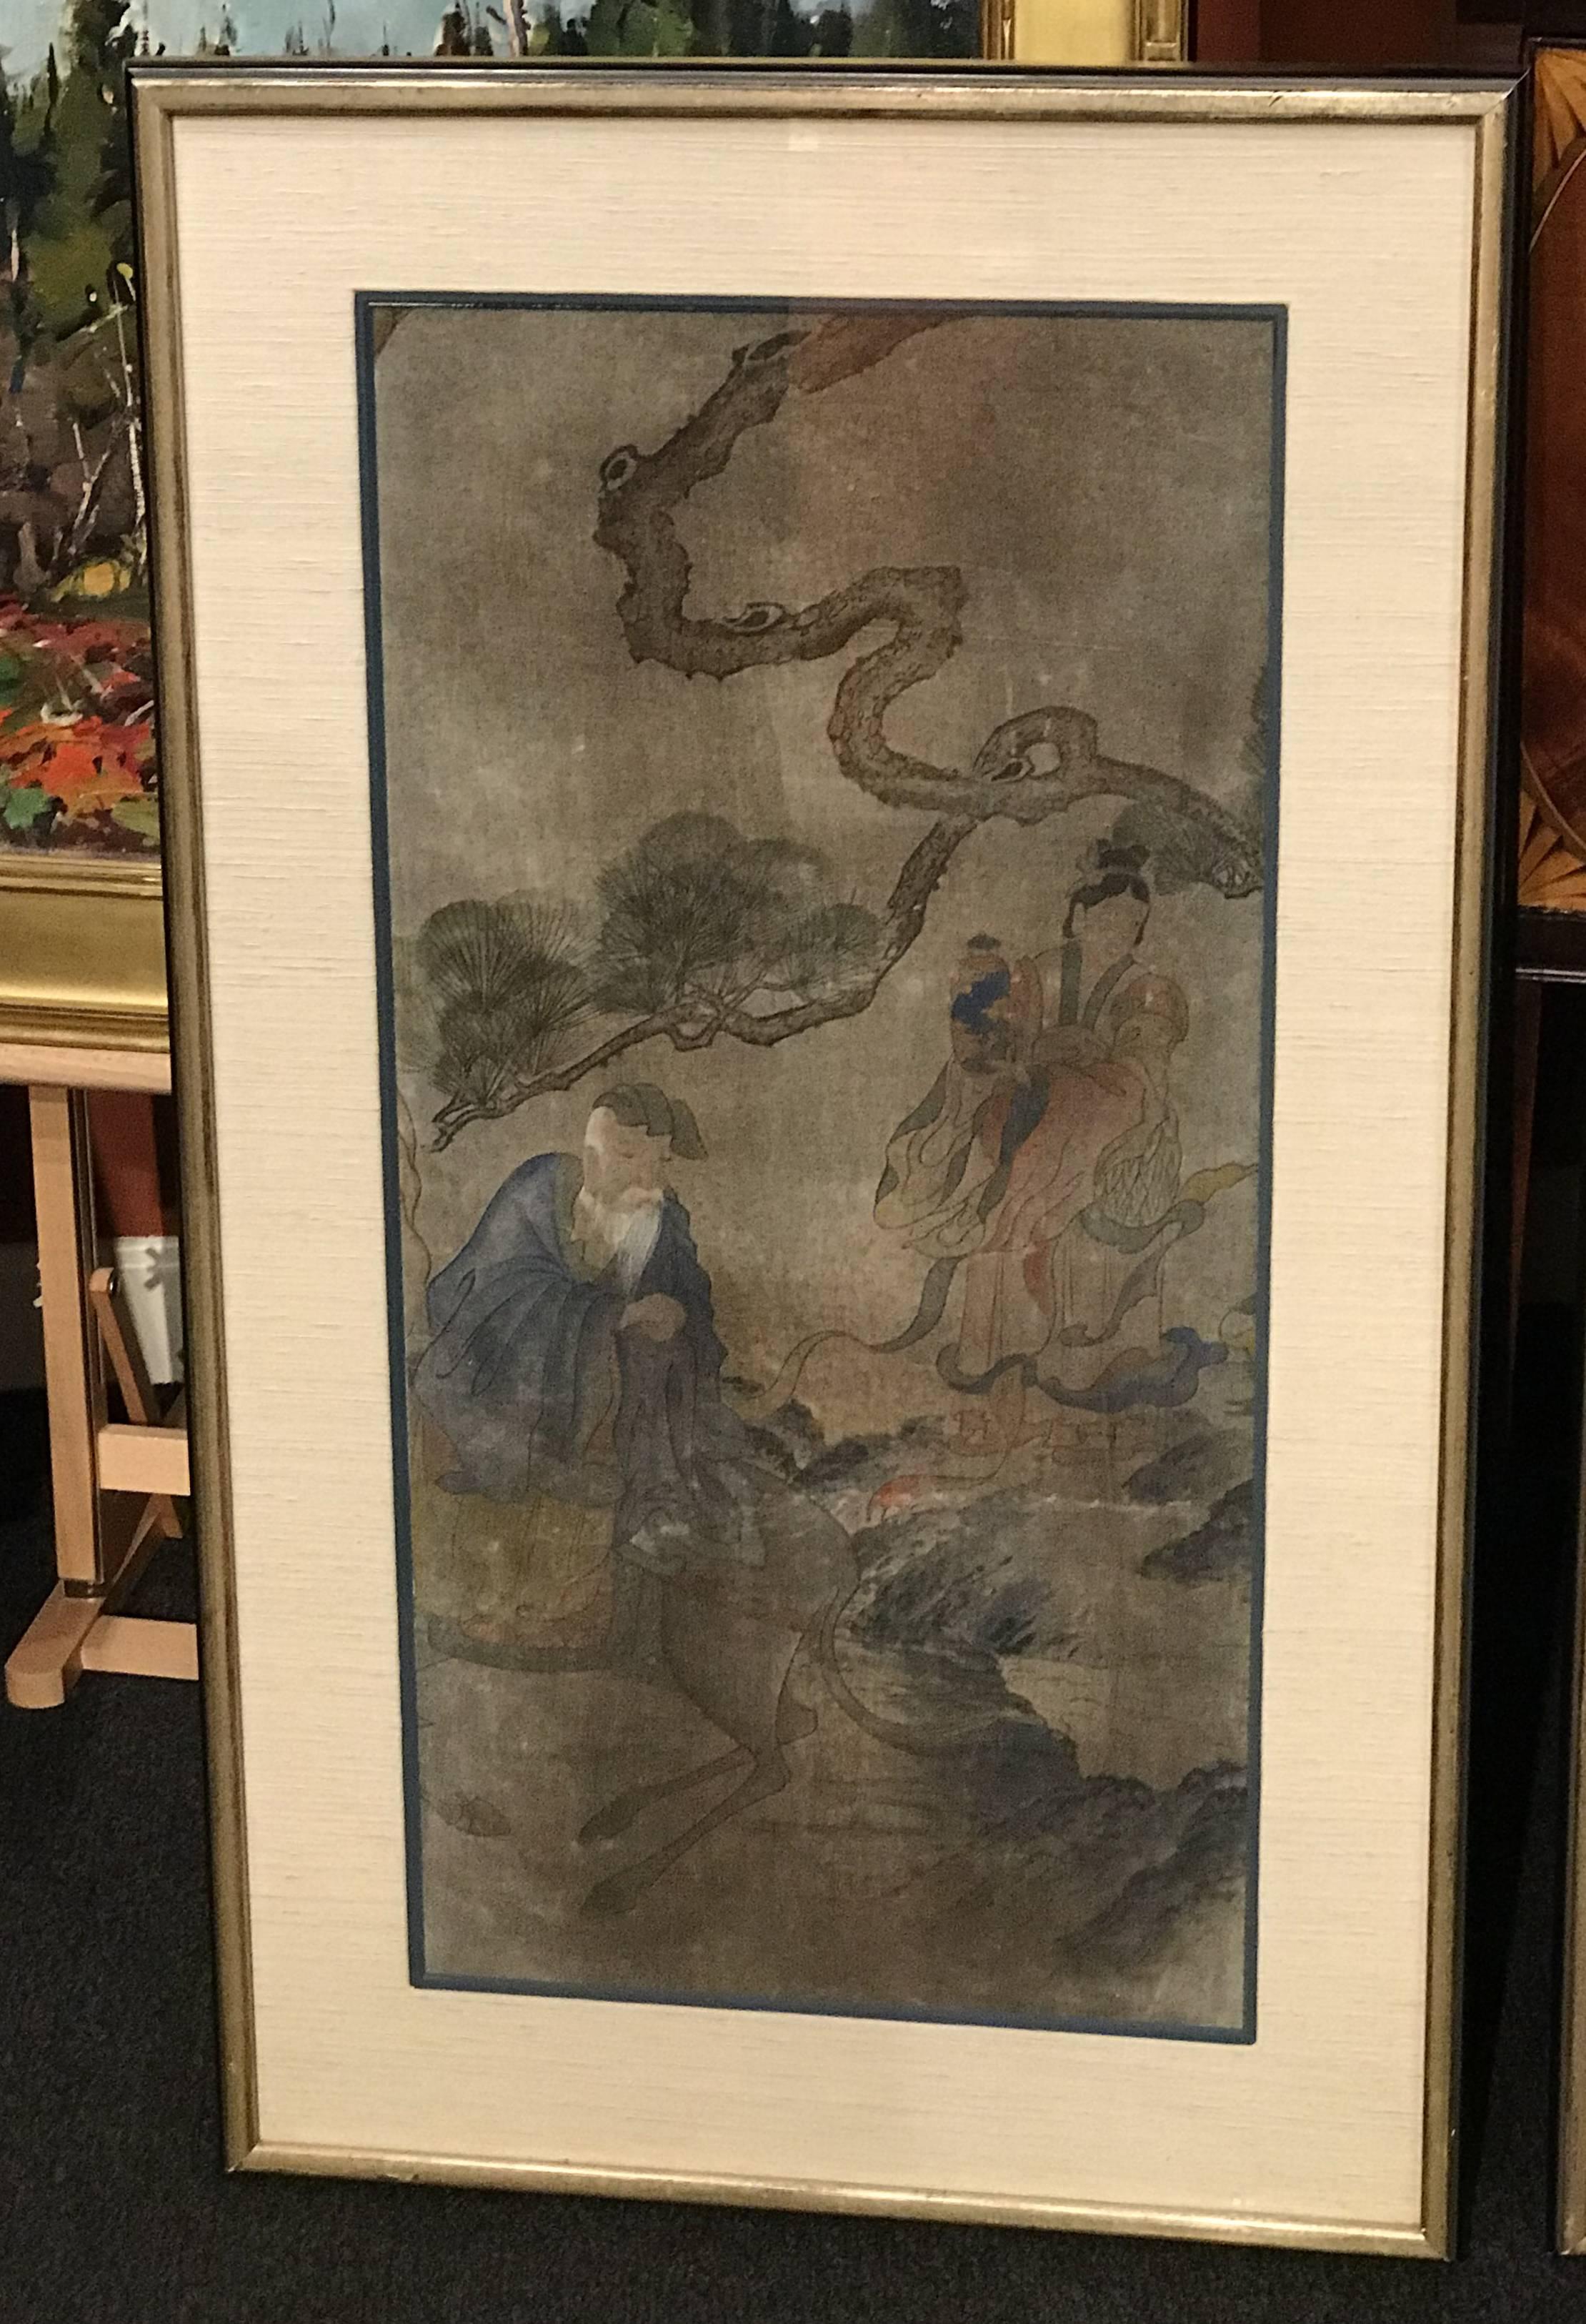 A fine hand-painted three-panel triptych on fabric, possibly silk, featuring folklore scenes with figures, horses, and landscapes from the Yi dynasty of Korea, probably dating to the 19th century. matted in linen mats with a gray highlight, under